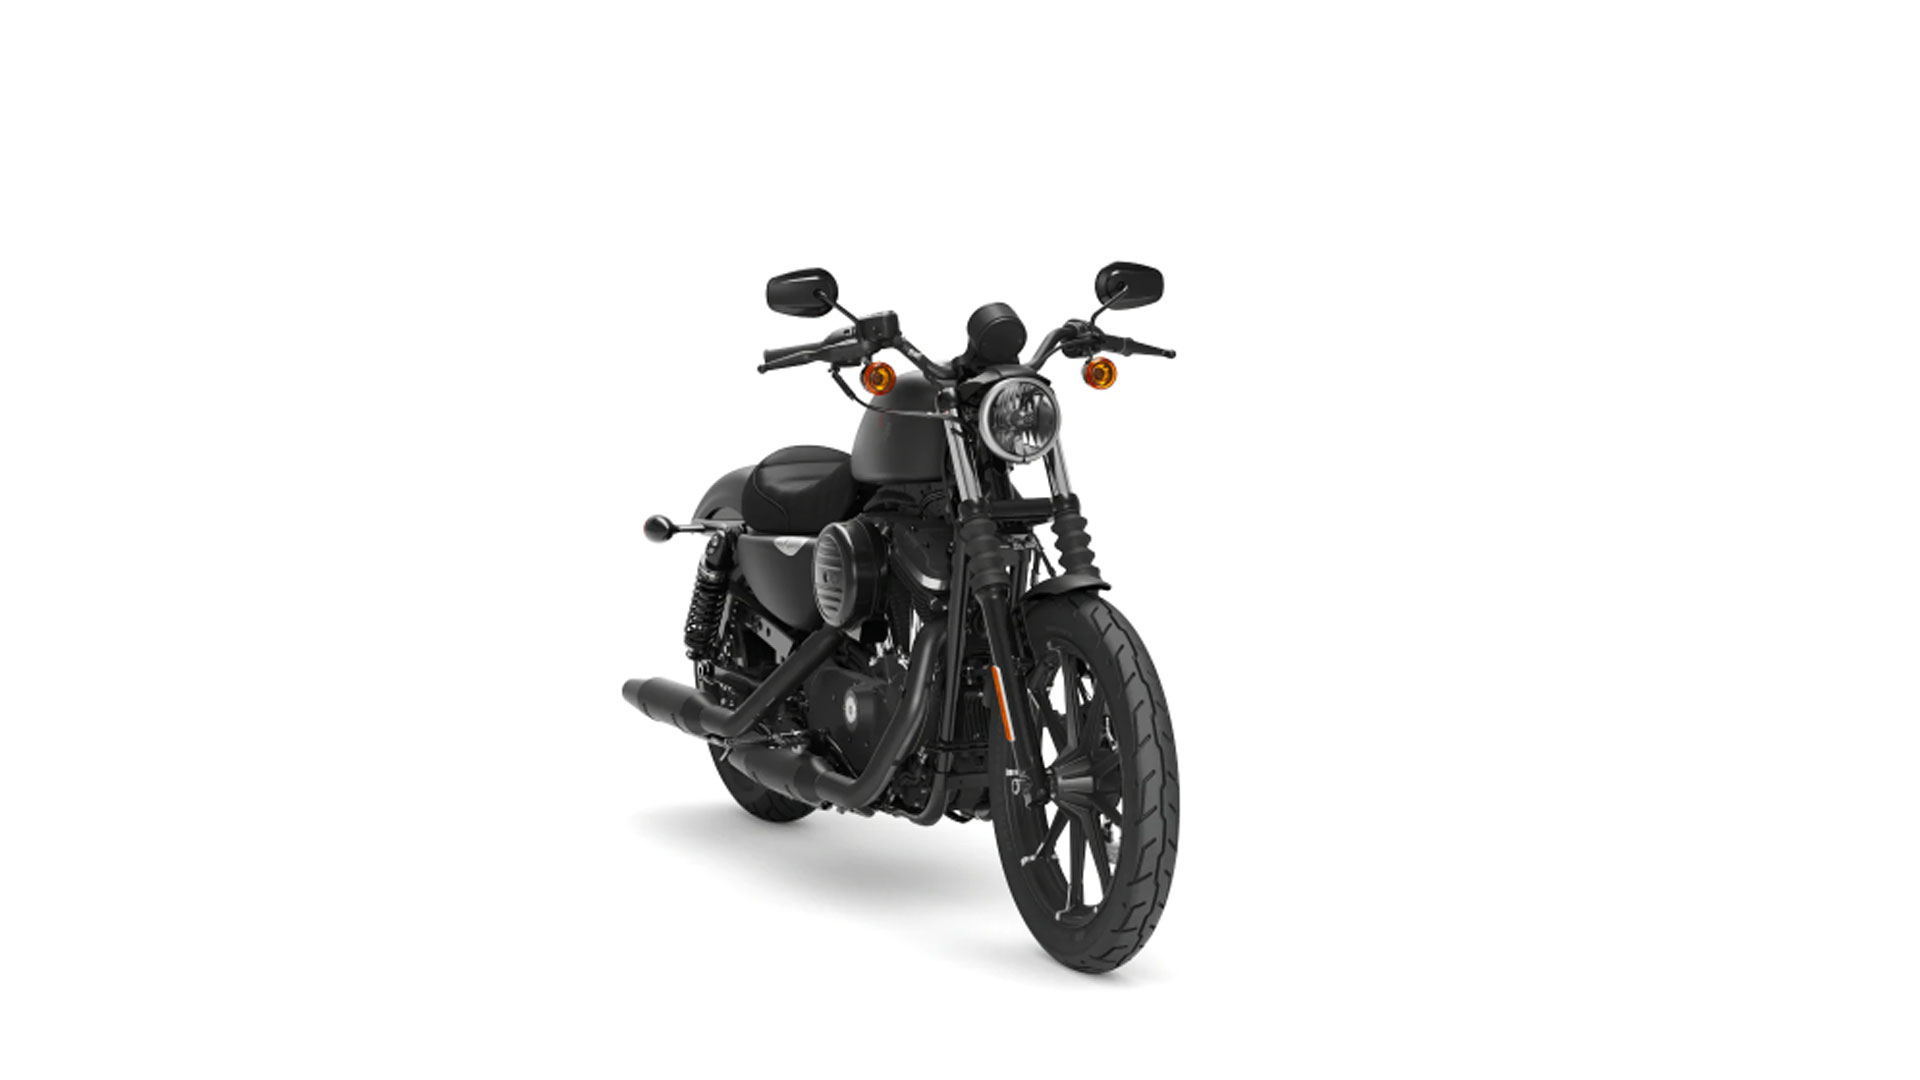 Iron 883 On Road Price In Chennai Promotion Off56